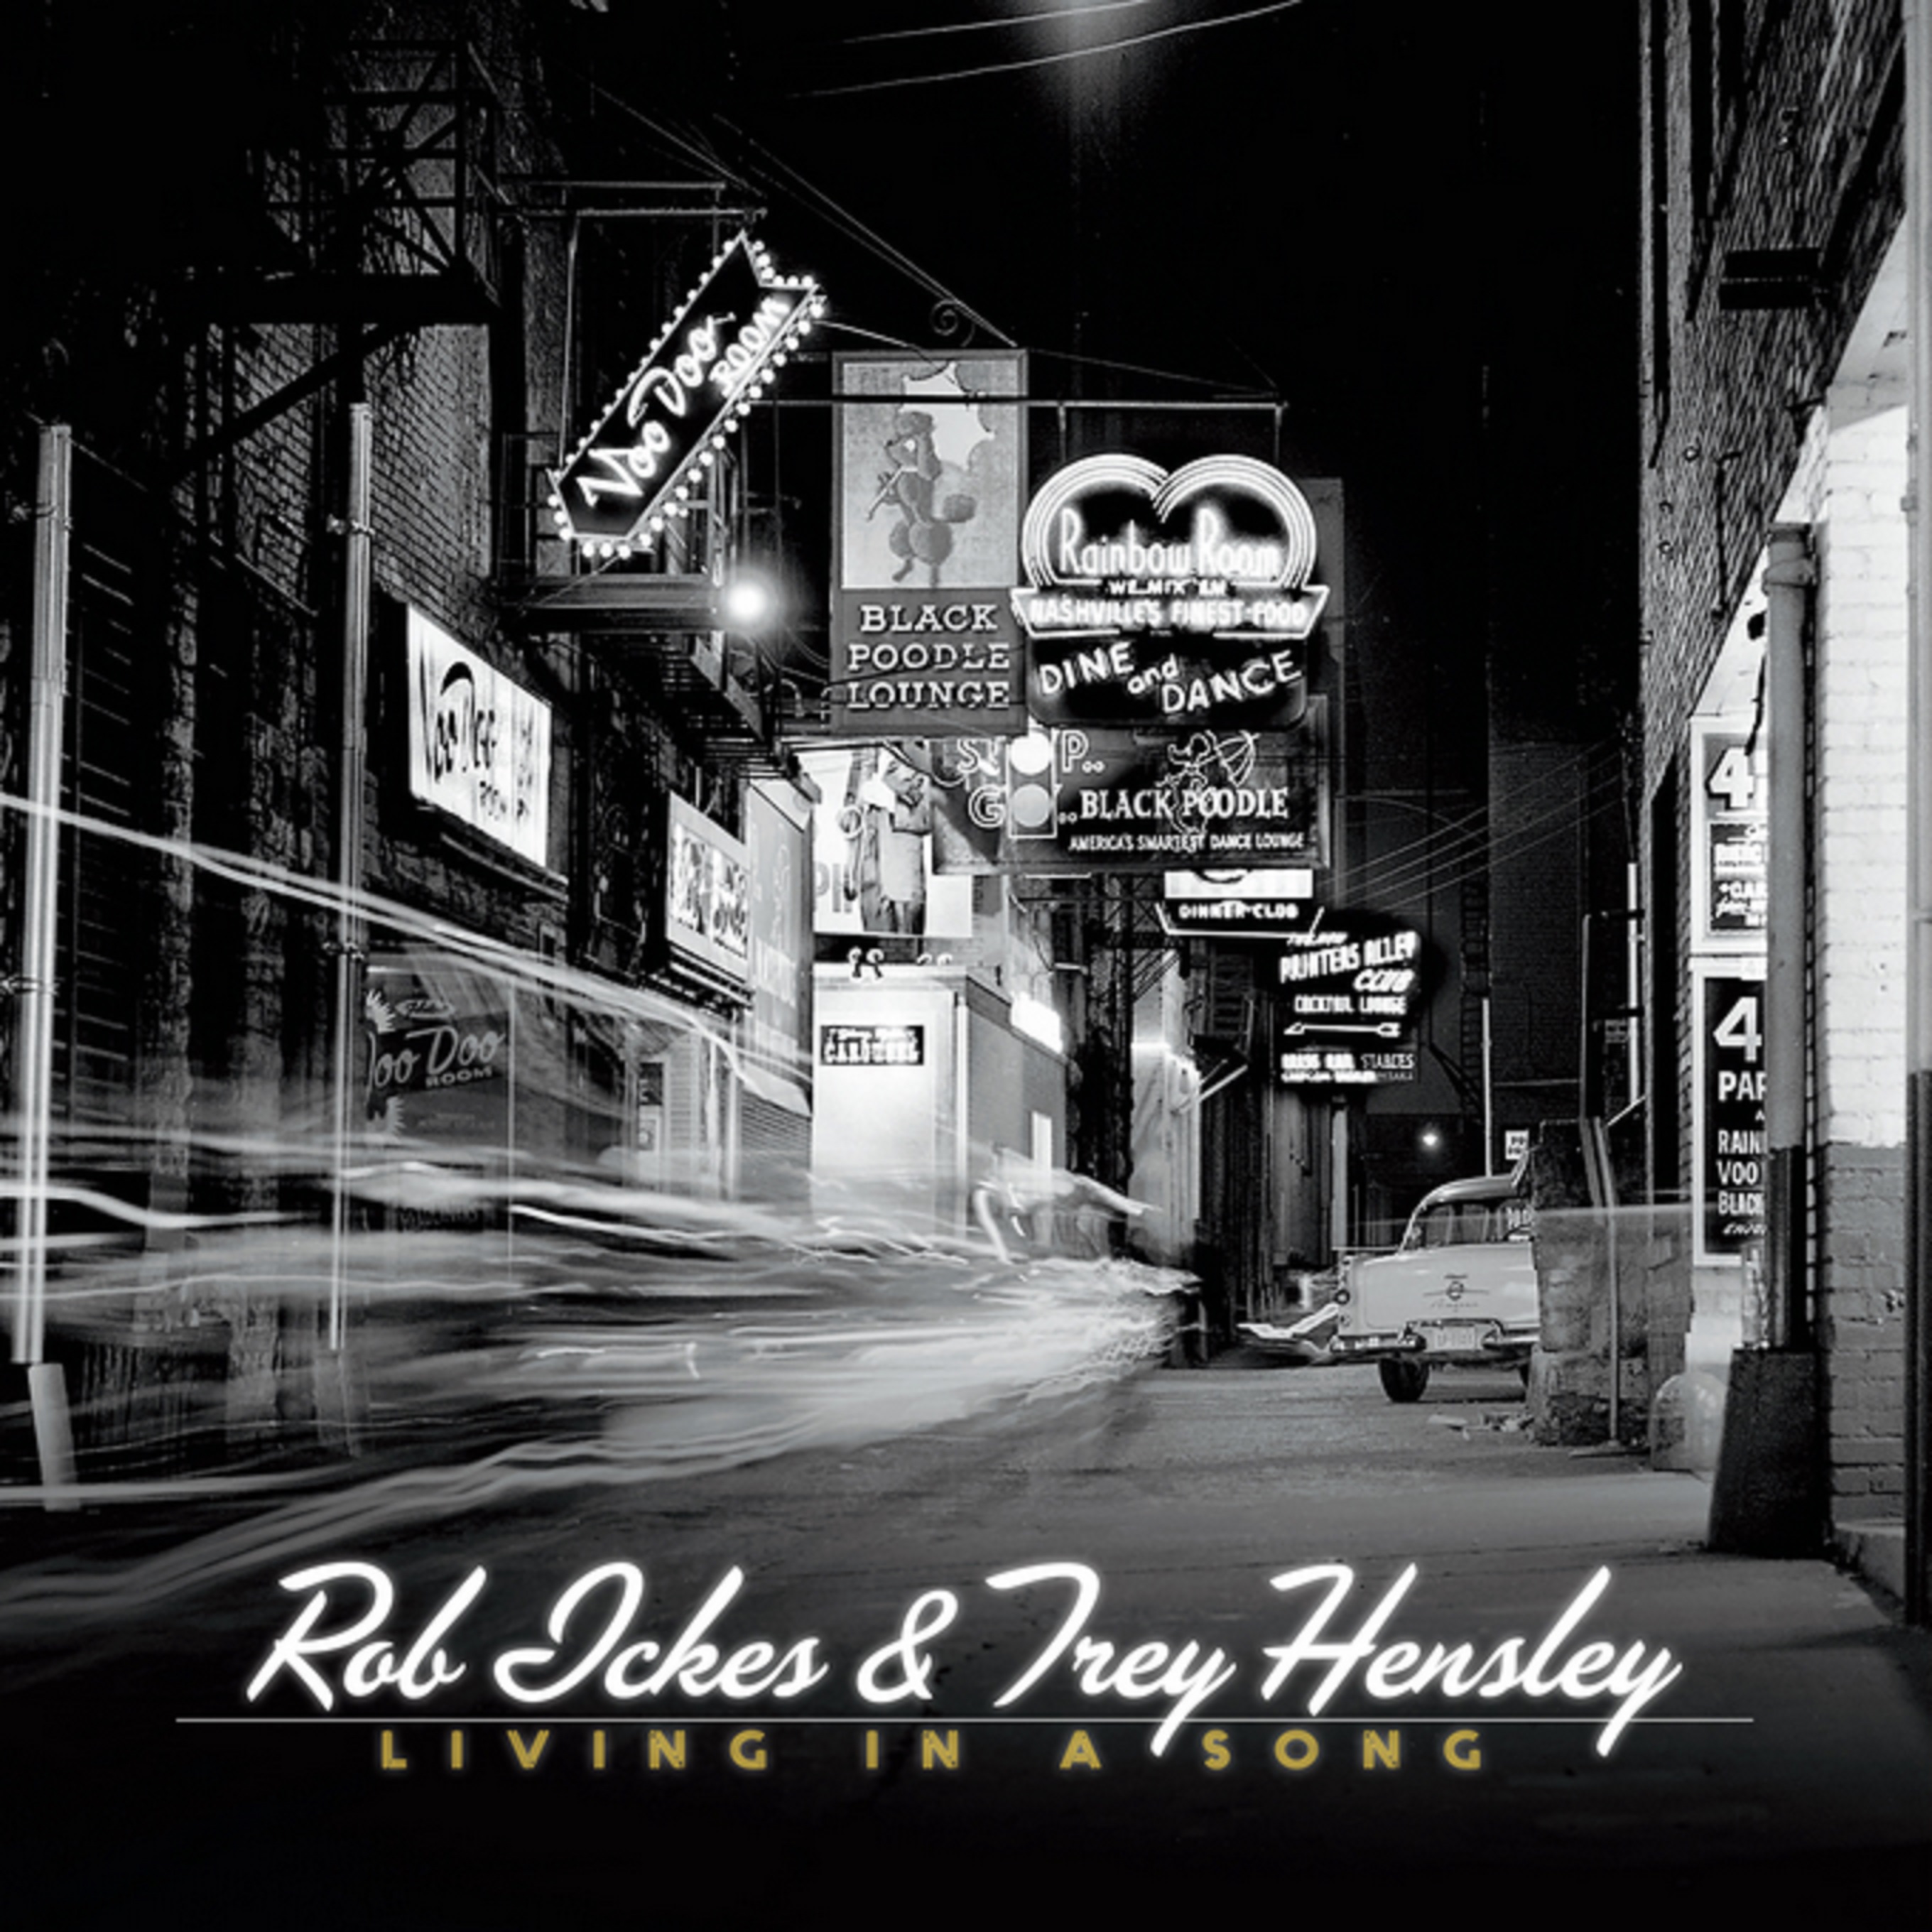 Rob Ickes And Trey Hensley Announce New Album With Raucous New Single “Living In A Song”